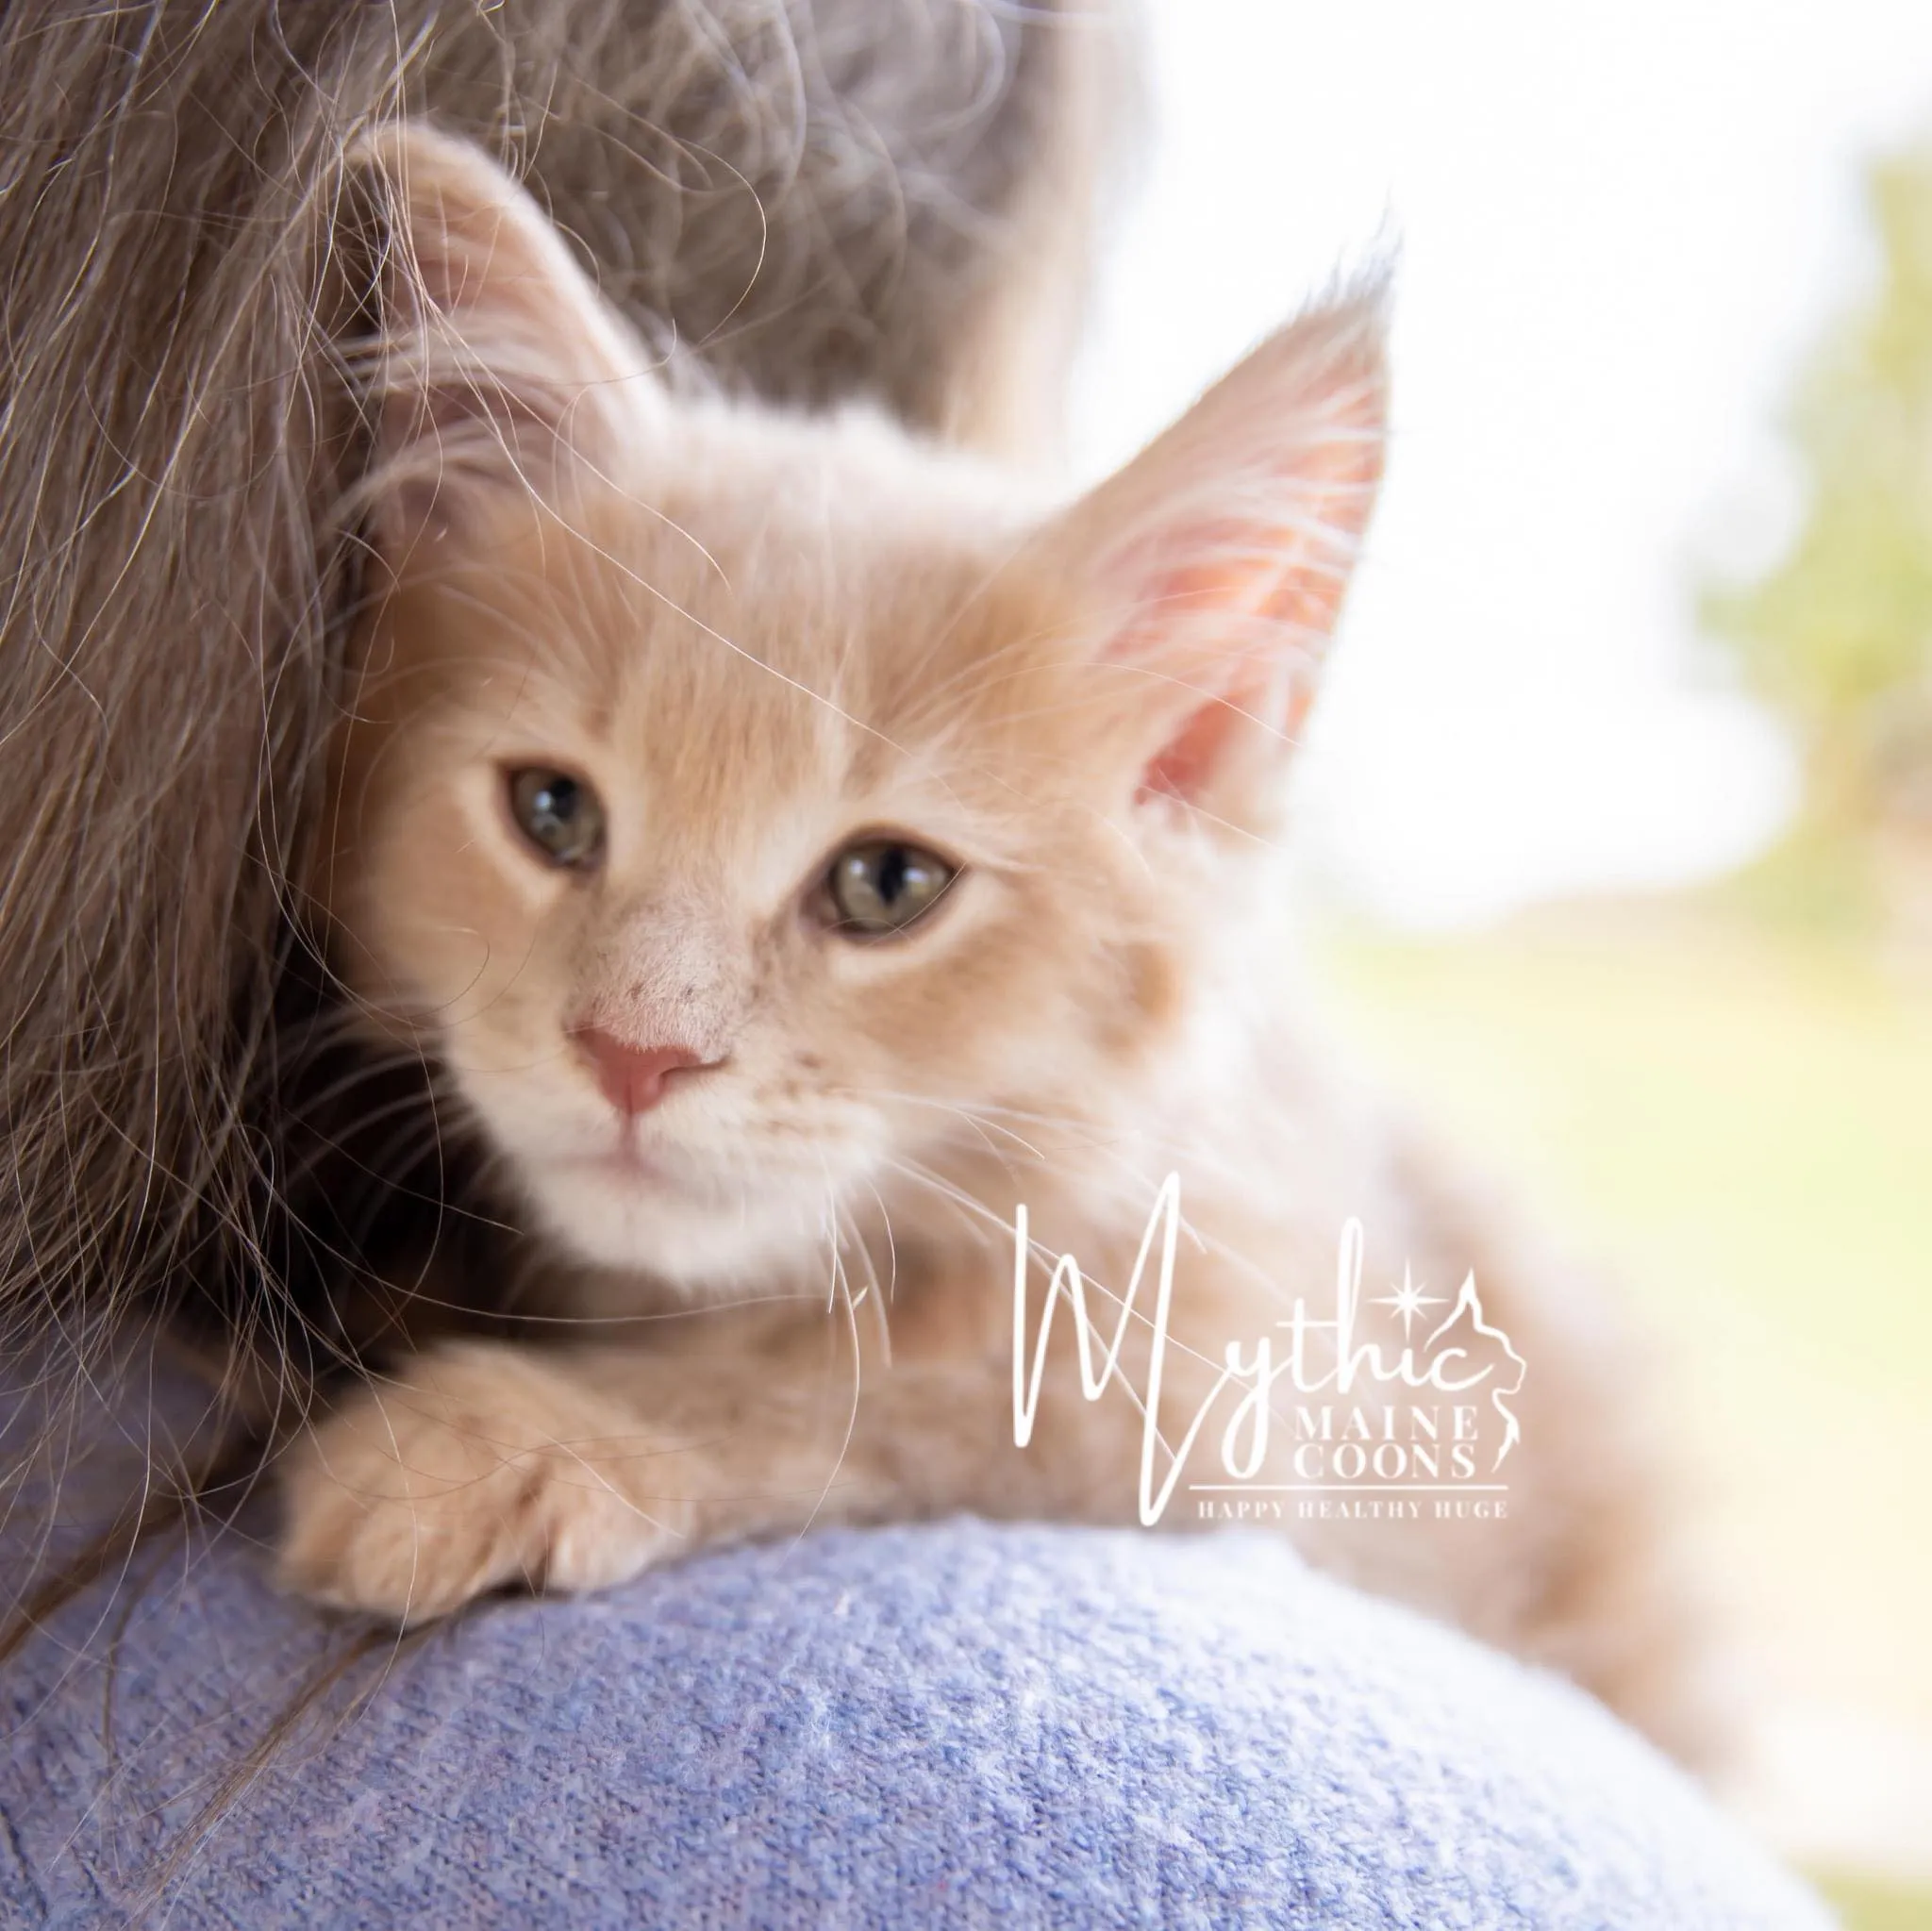 Mythic Maine Coons Logo